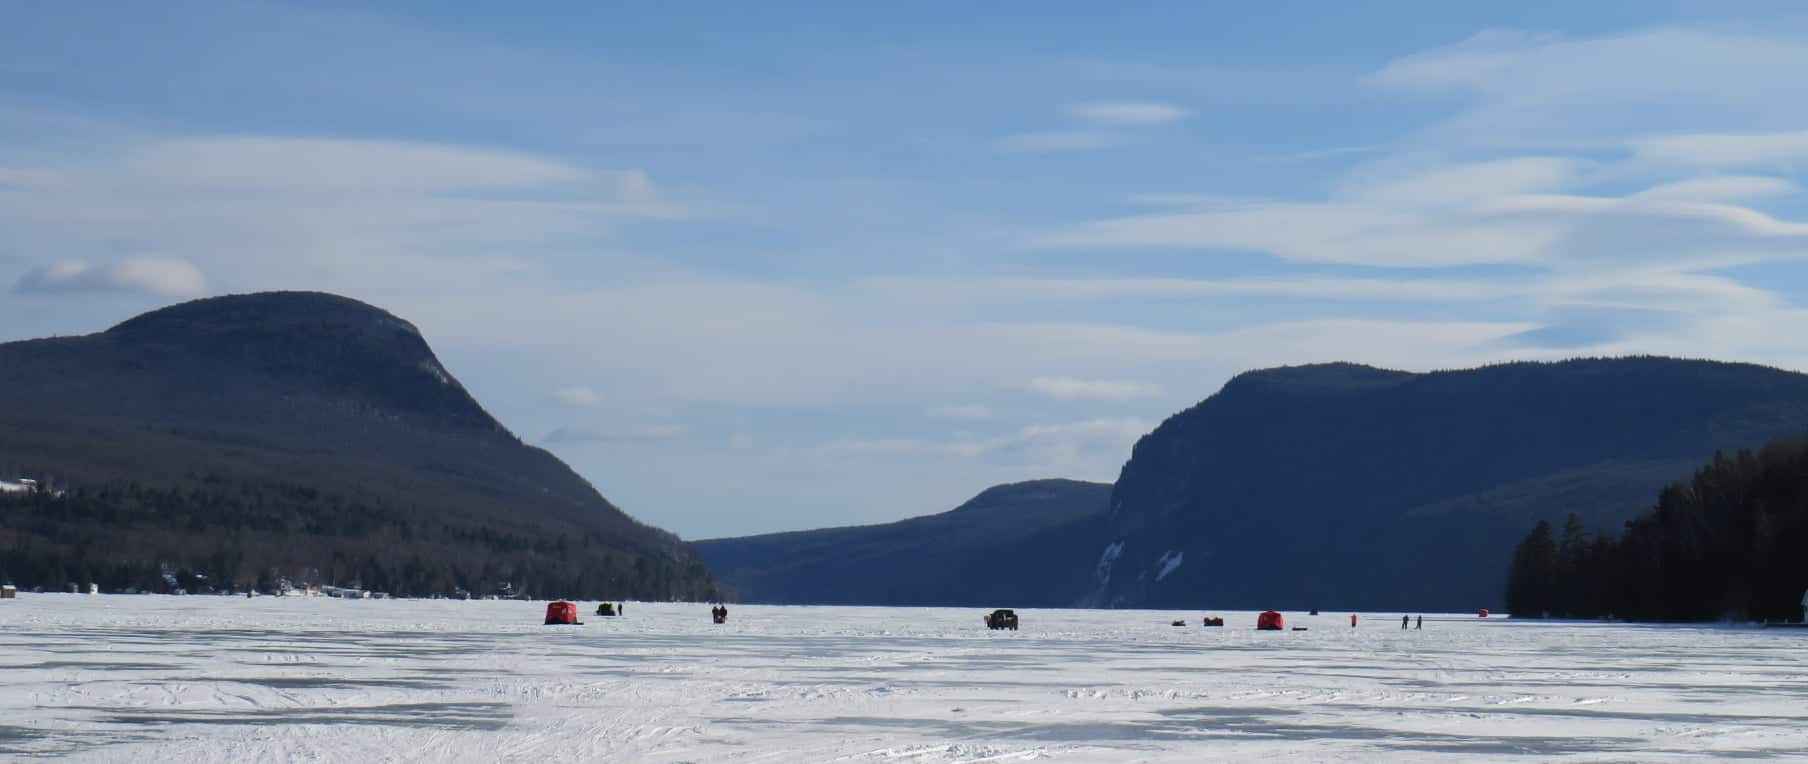 Burke Area Chamber of Commerce - Ice Fishing Huts on Lake Willoughby